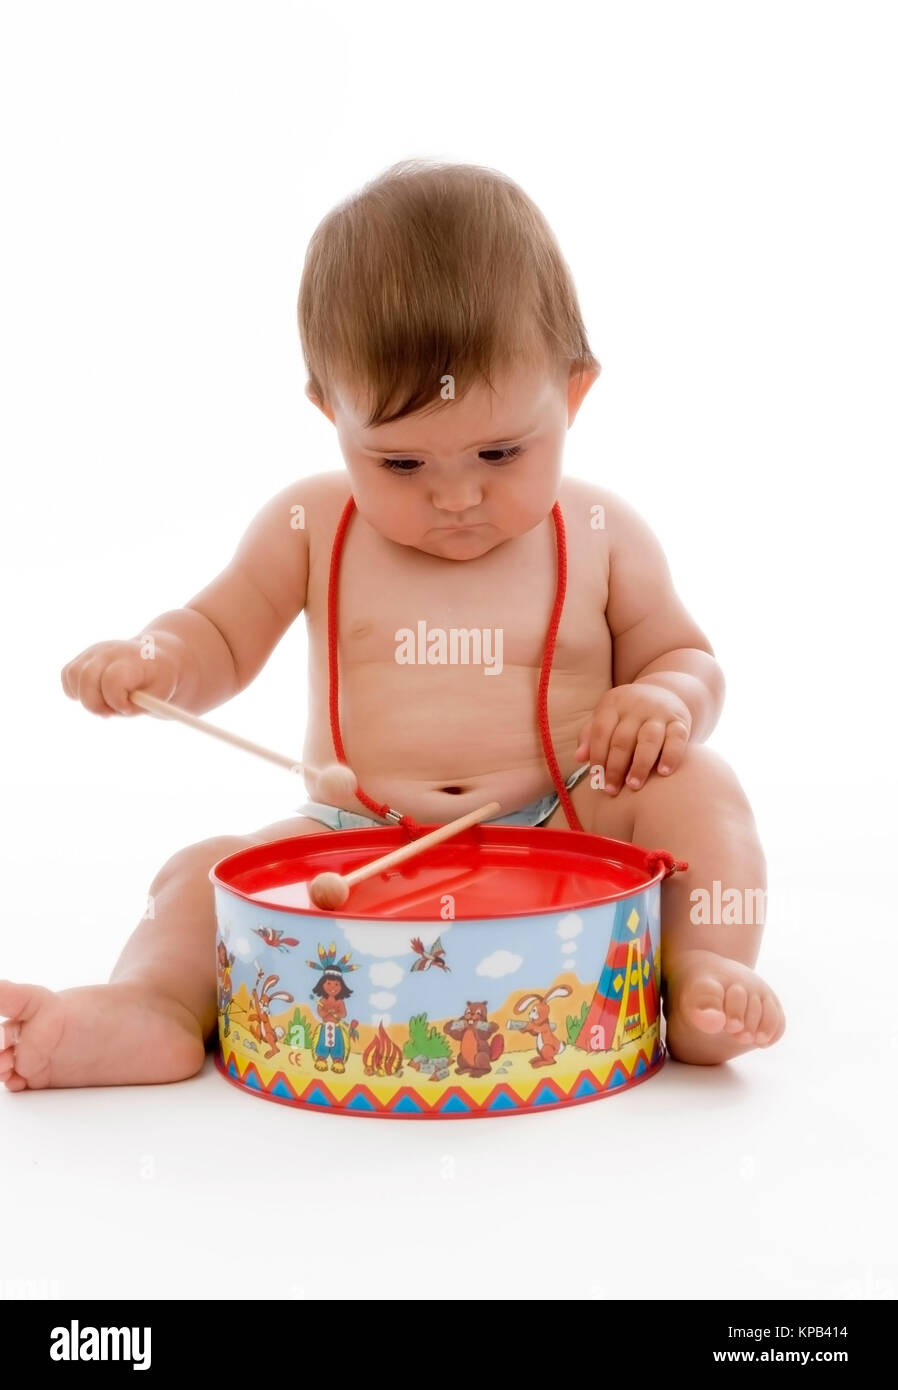 Model release, Kleinkind, 8 Monate, mit Kindertrommel - little child with toy drums Stock Photo